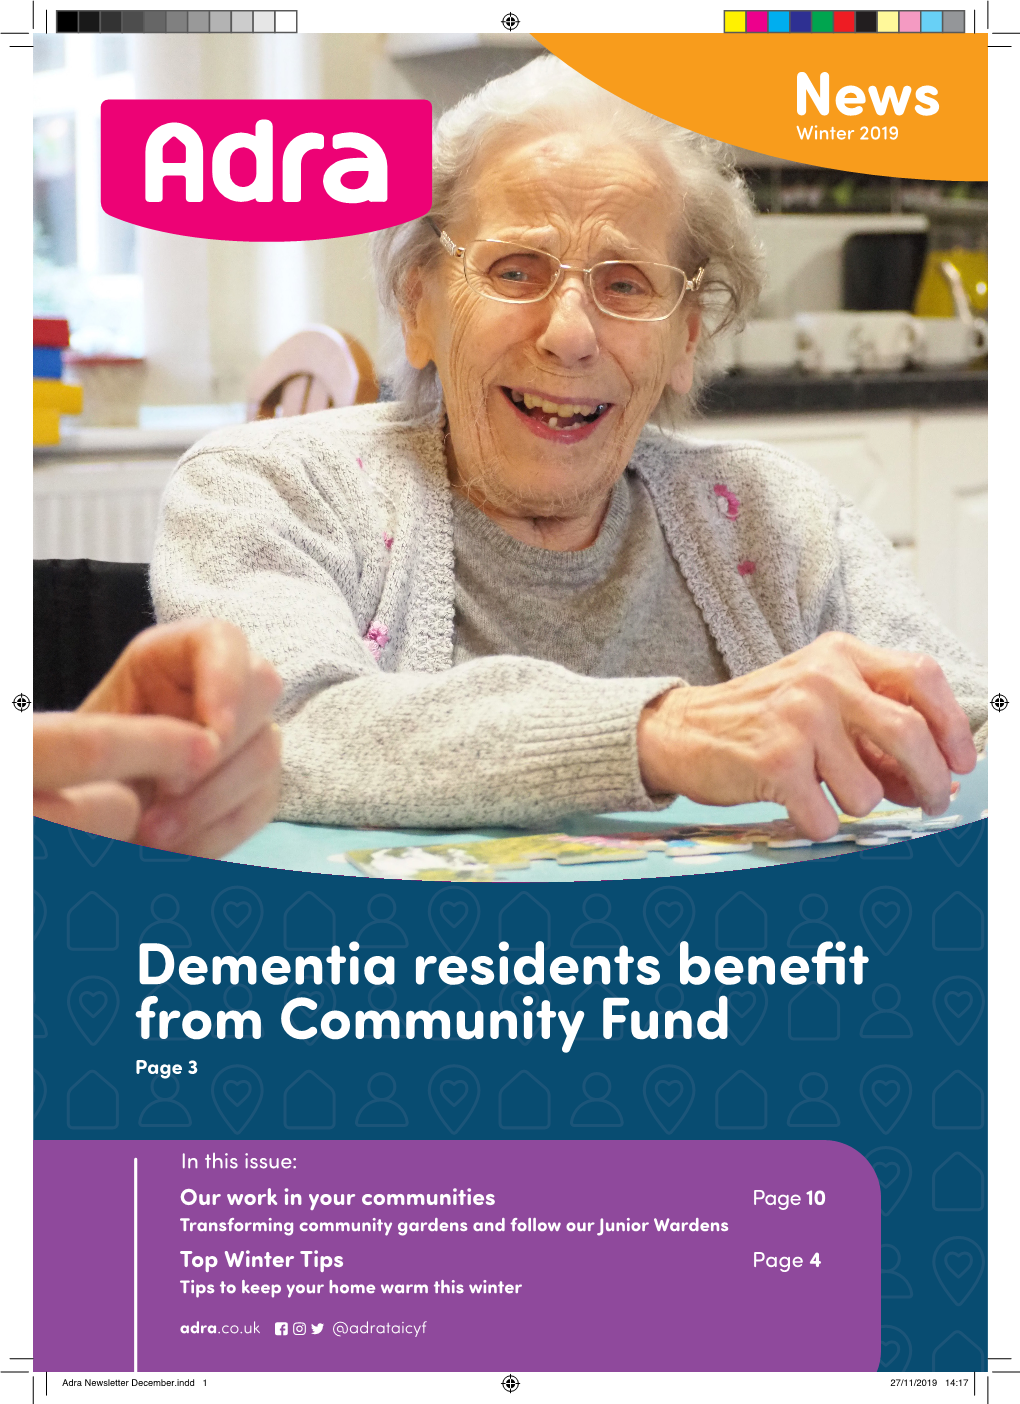 Dementia Residents Benefit from Community Fund Page 3